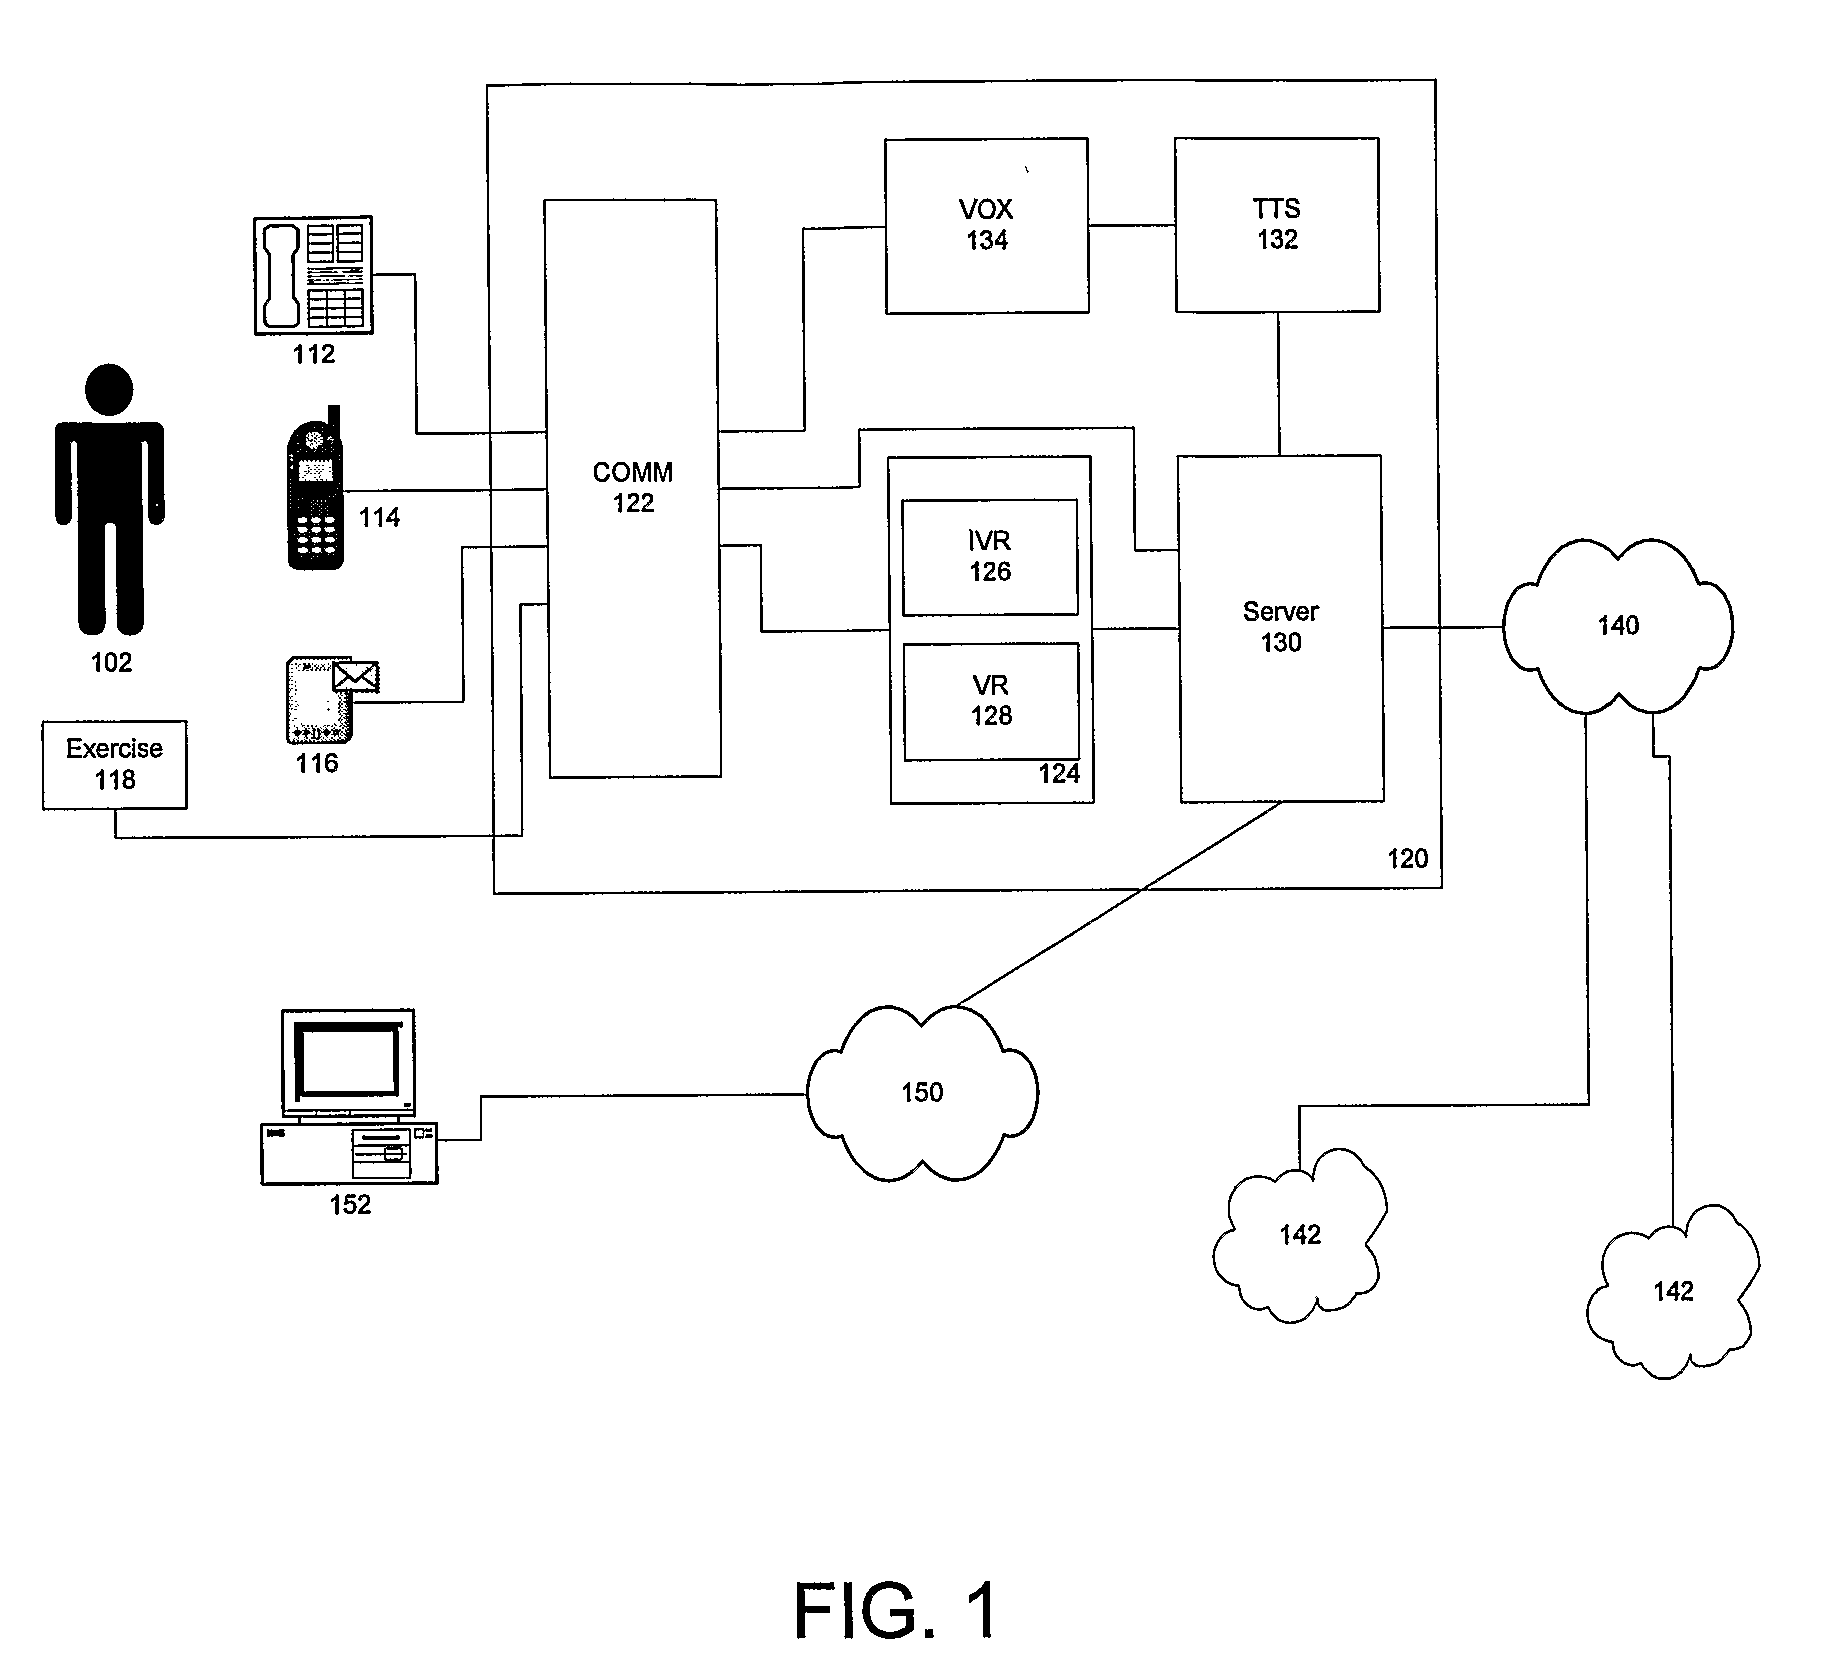 System and Method for a Telephone Feedback System for Fitness Programs